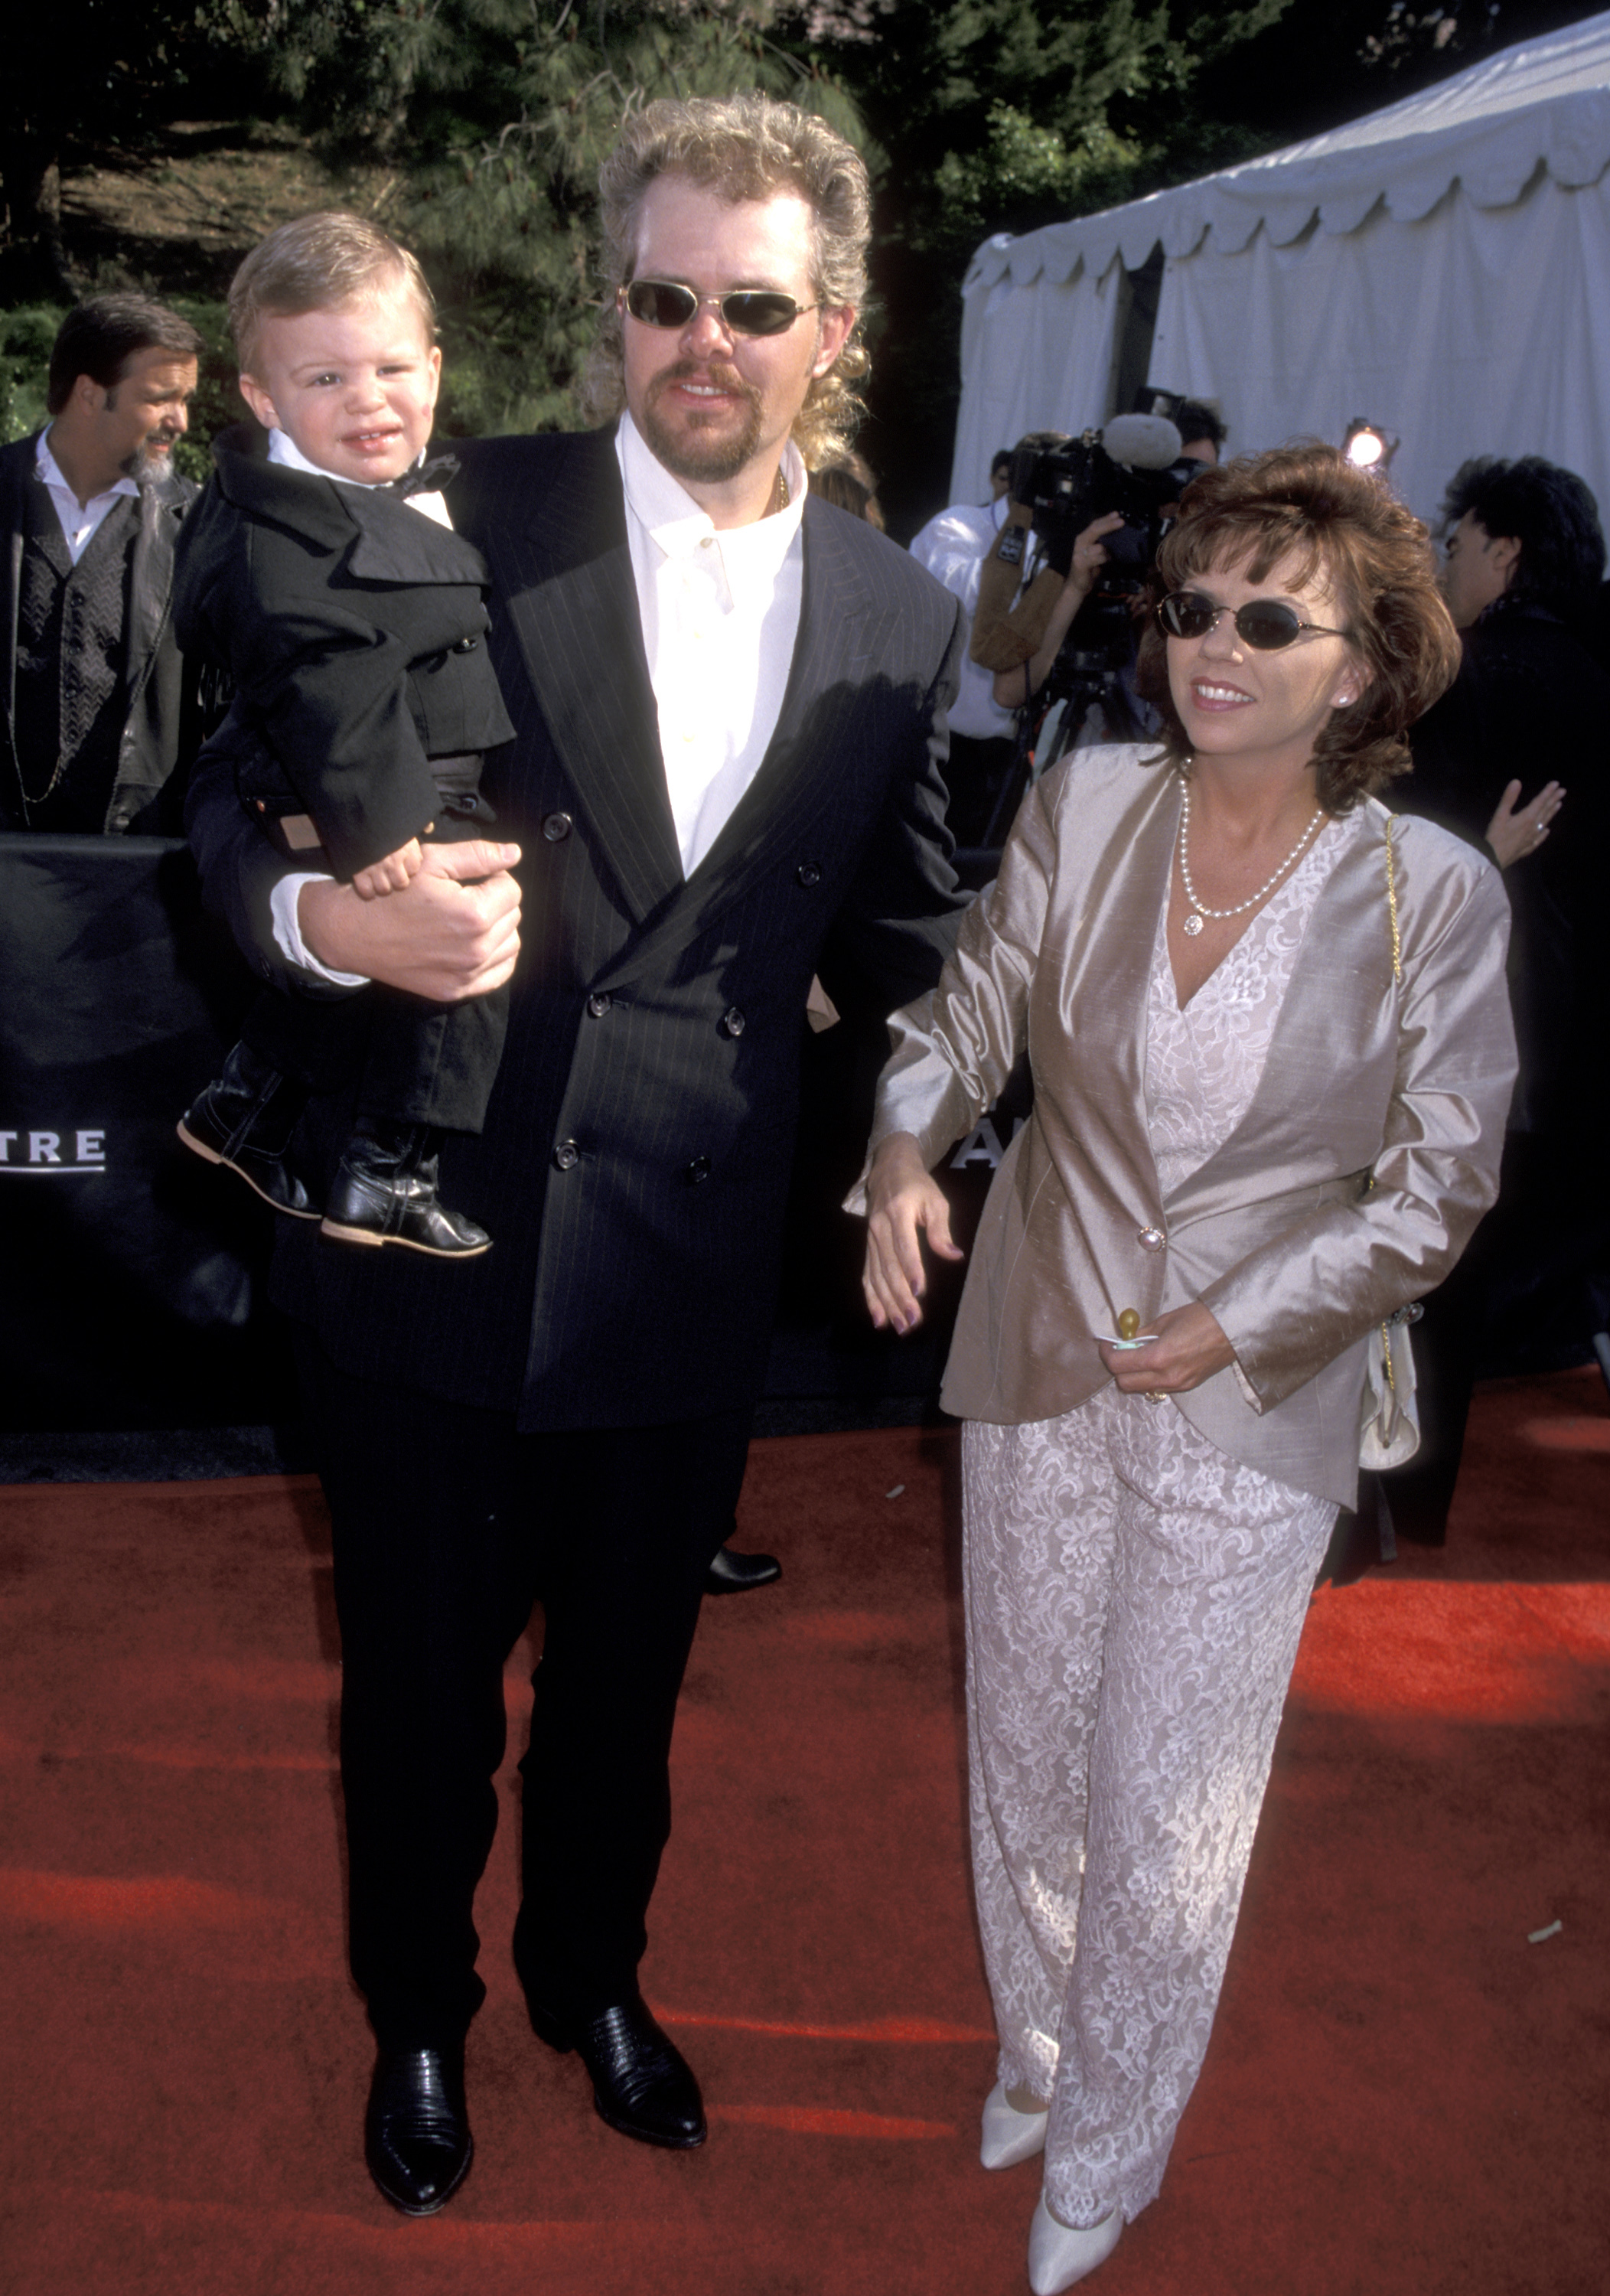 Toby Keith, wife Tricia Covel, and son Stelen Covel attend the 33rd Annual Academy of Country Music Awards in 1998 | Source: Getty Images